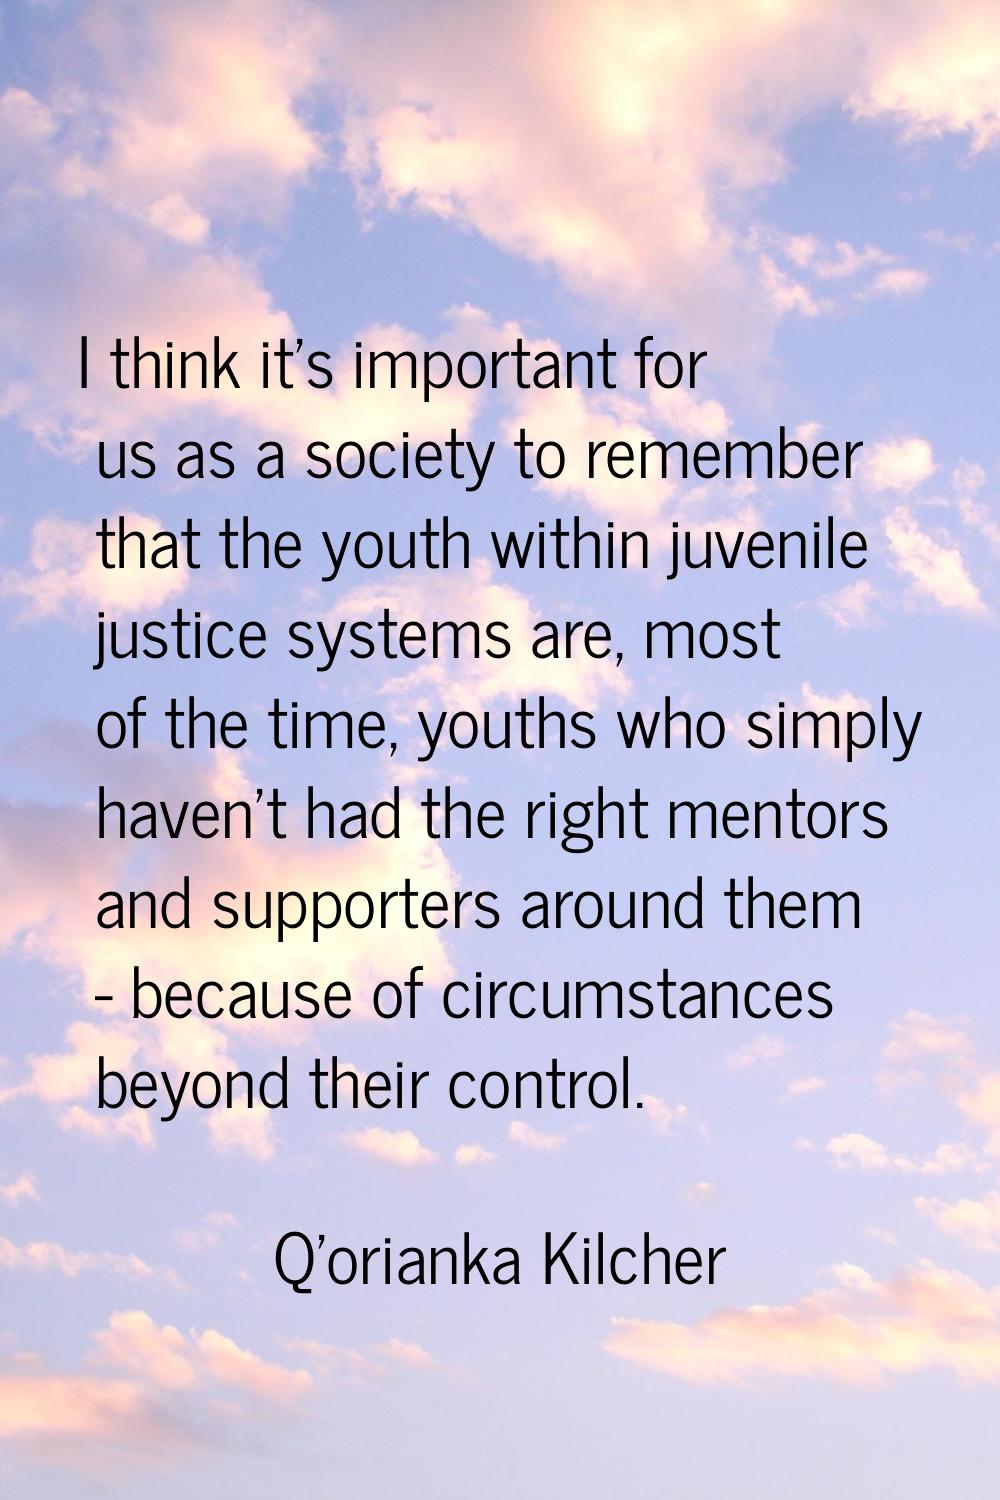 I think it's important for us as a society to remember that the youth within juvenile justice syste